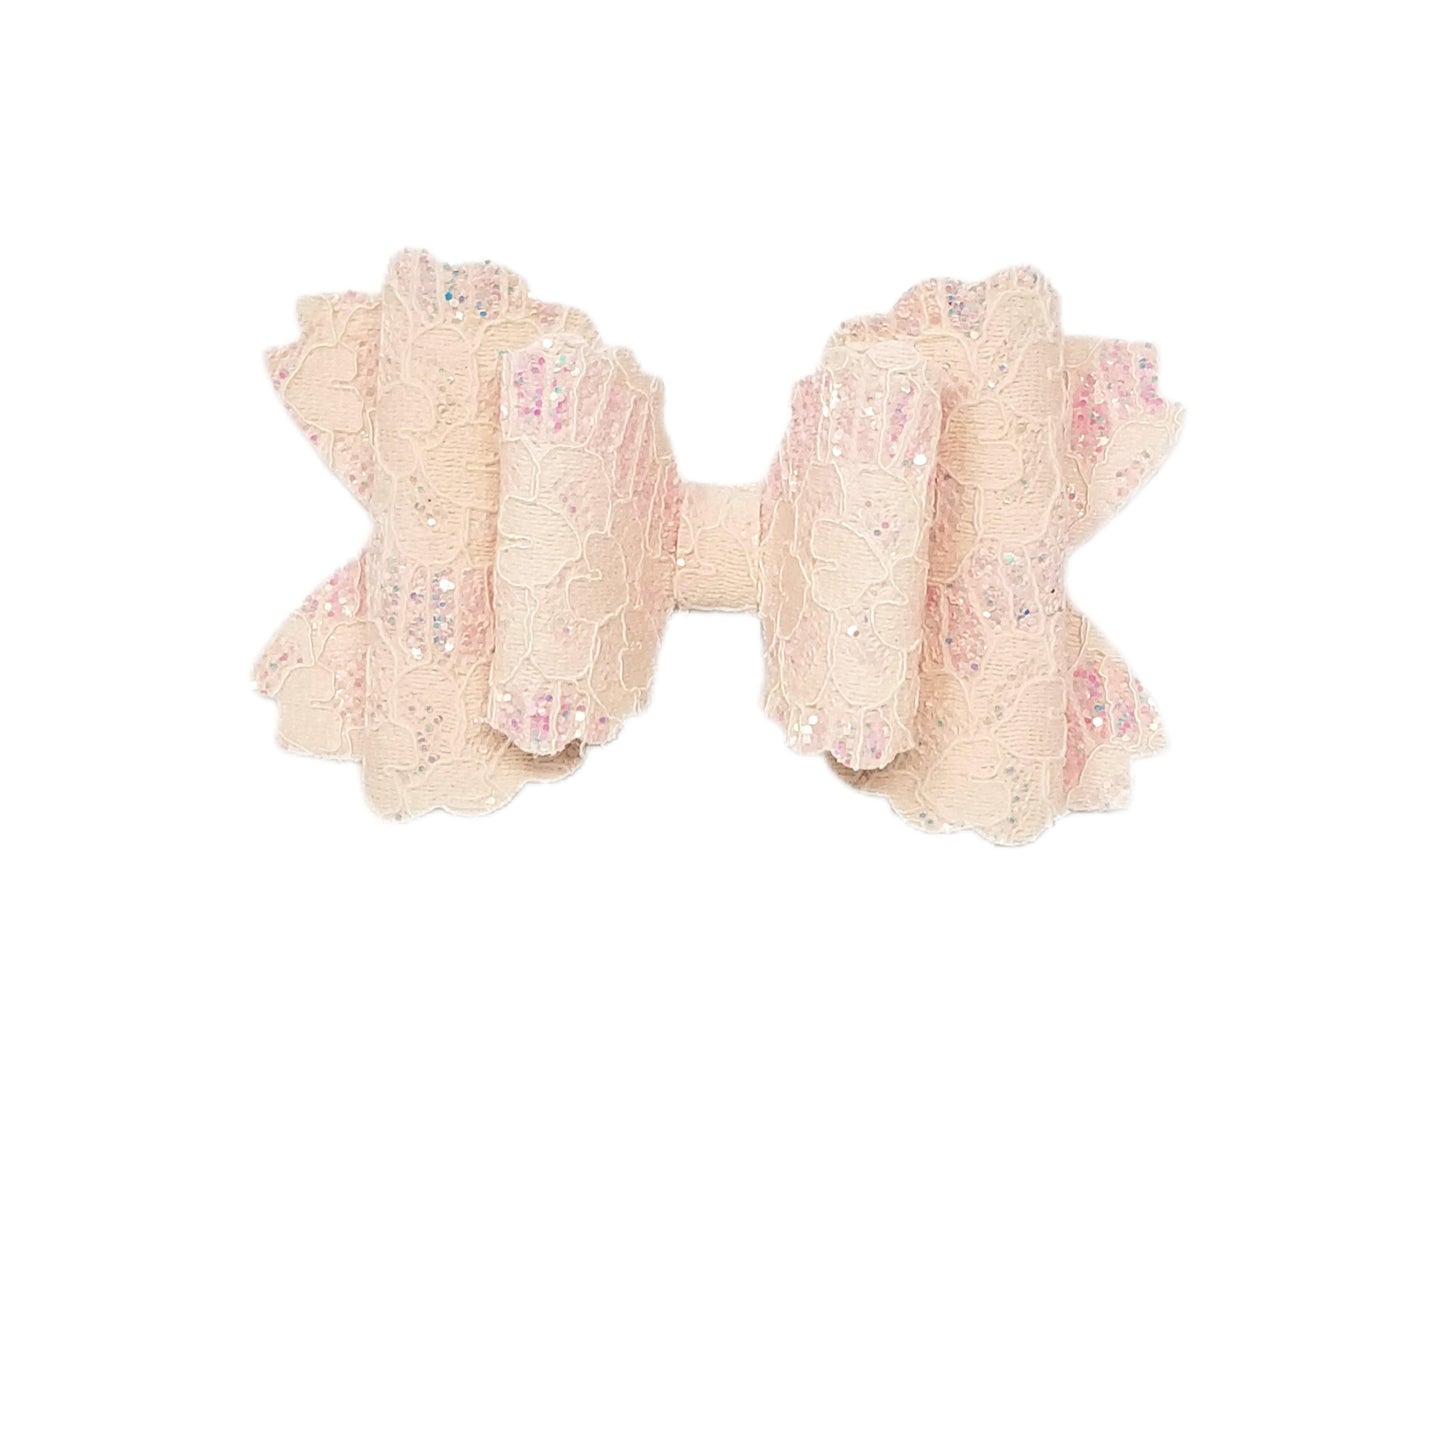 4 inch Pink Lace Double Scalloped Daisy Bow